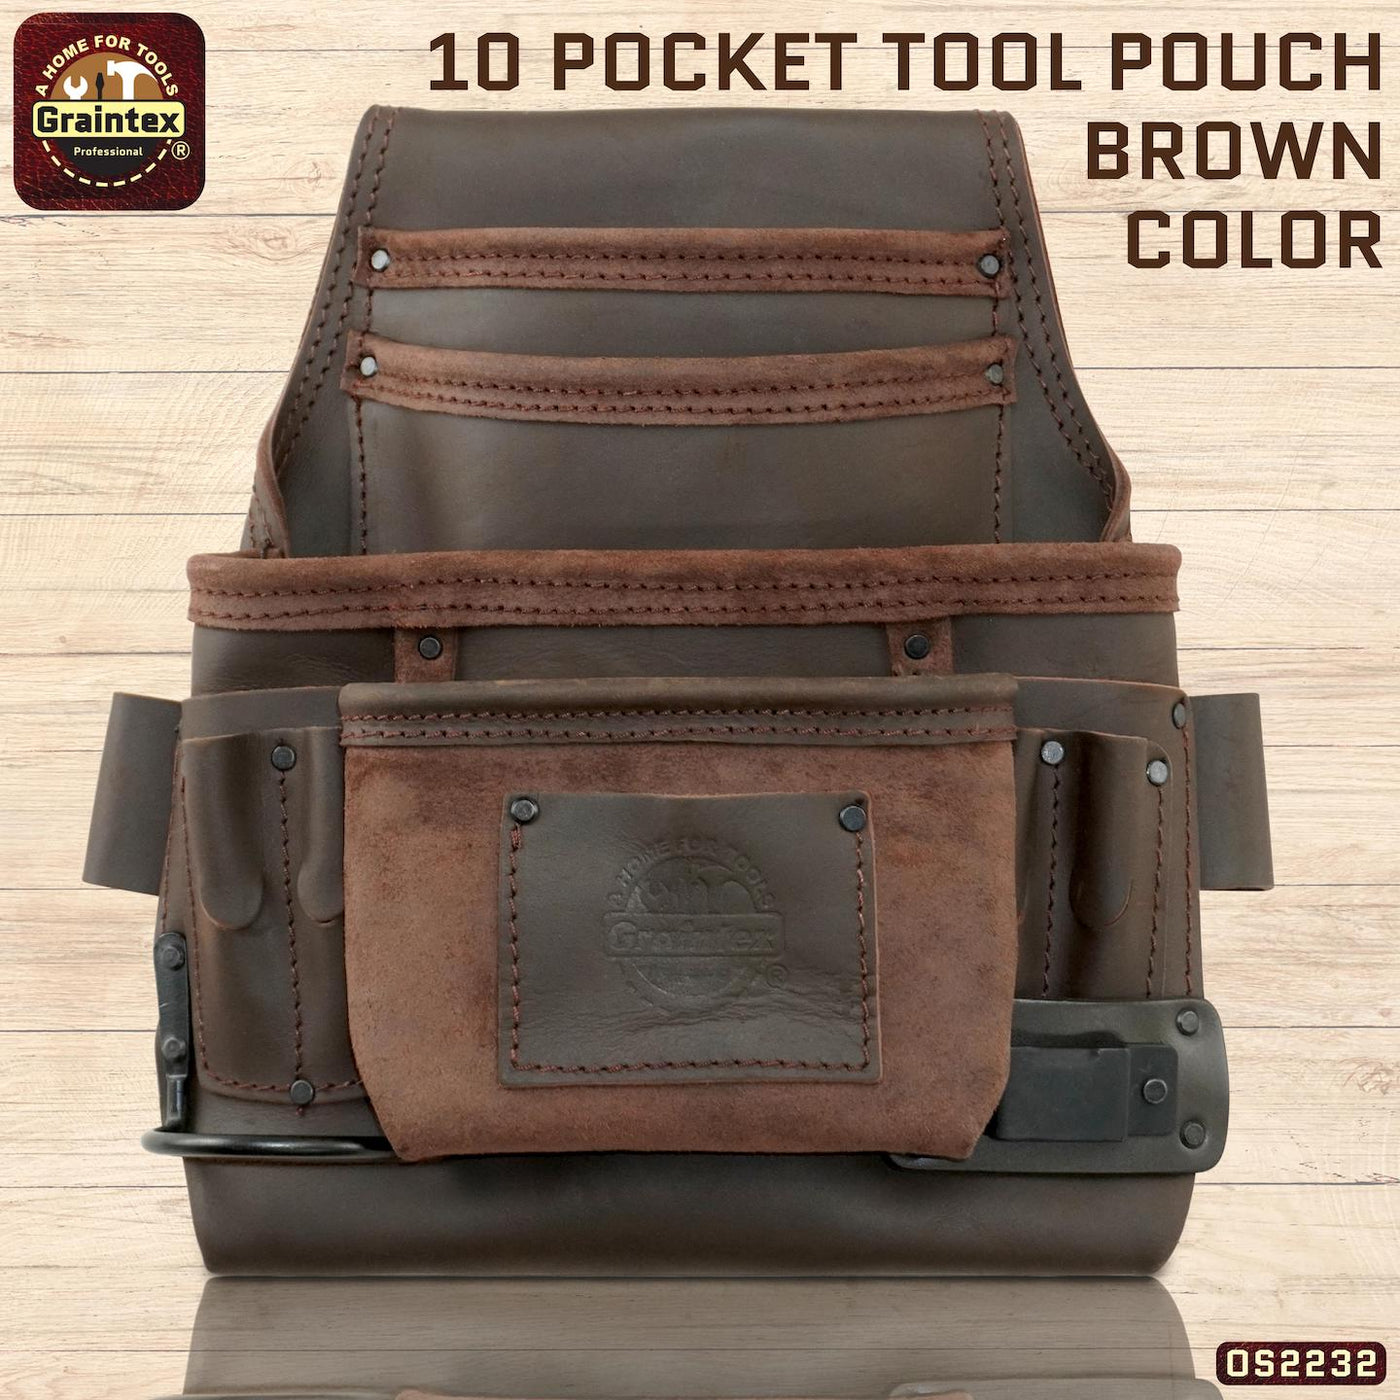 OS2232 :: 10 Pocket Nail & Tool Pouch Brown Color Oil Tanned Top Grain Leather